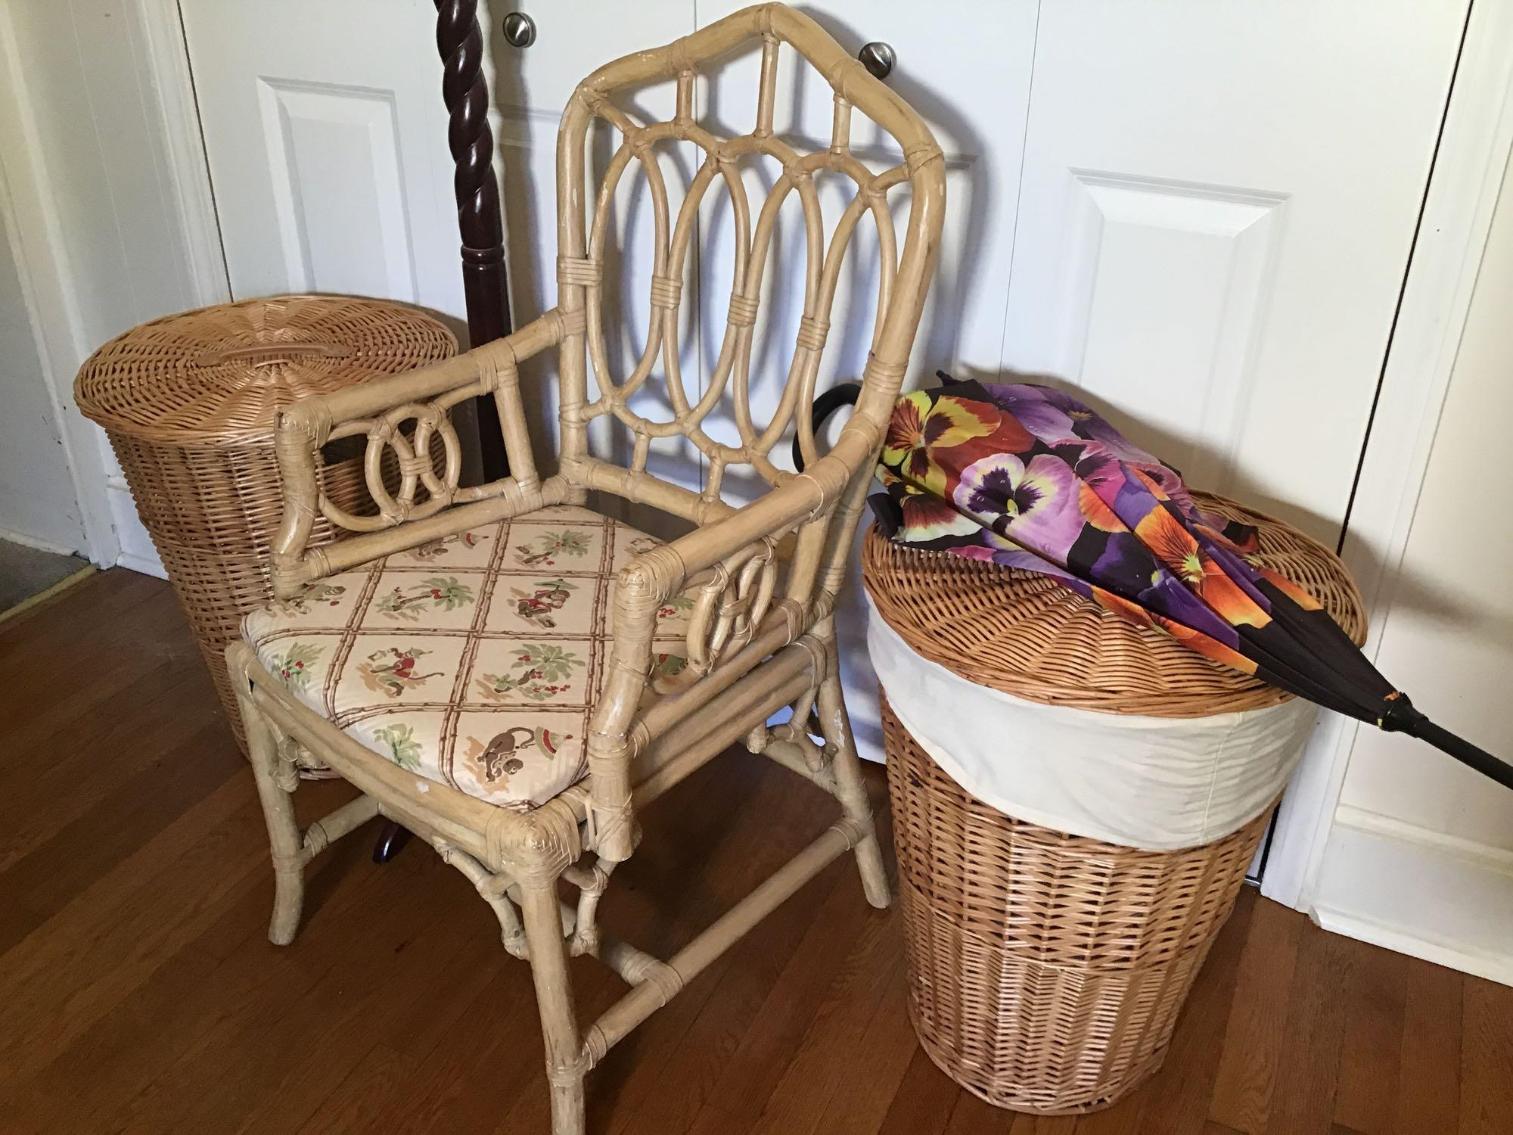 Image for Rattan Chair, Coat rack, and Baskets